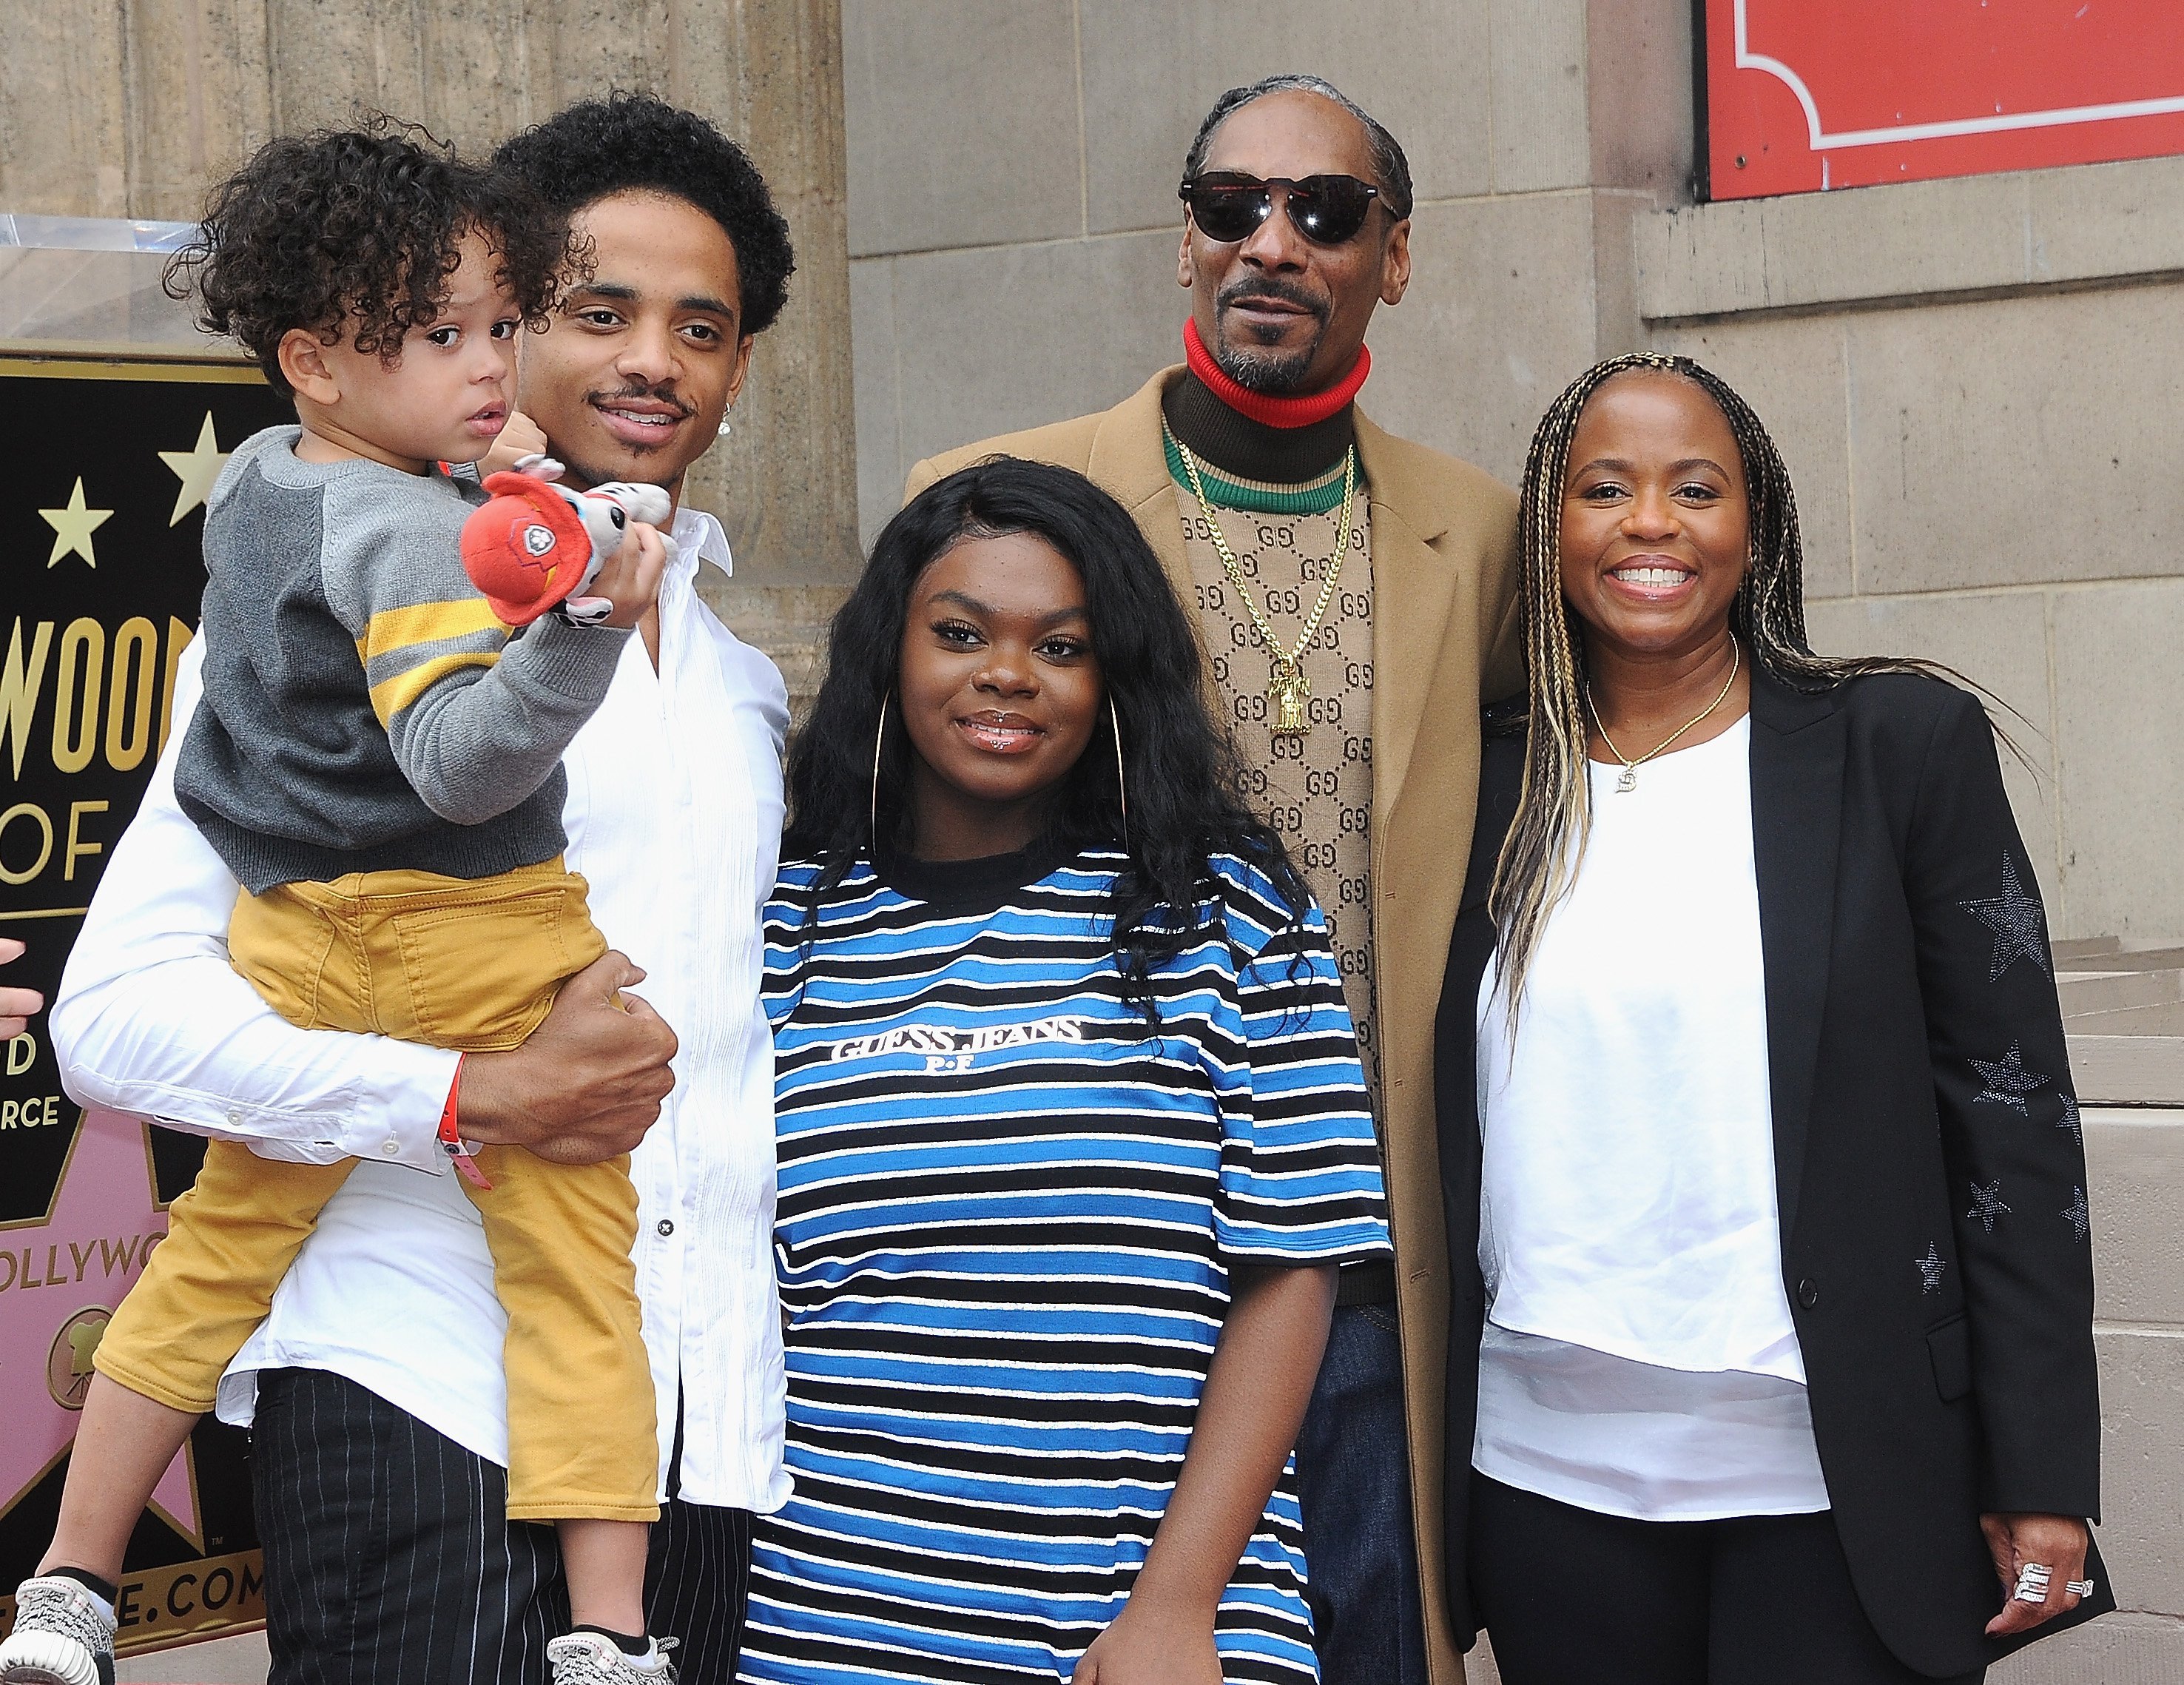 Snoop Dogg & Shante Broadus with family at Snoop Dogg's star ceremony on The Hollywood Walk of Fame on Nov. 19, 2018 | Photo: Getty Images